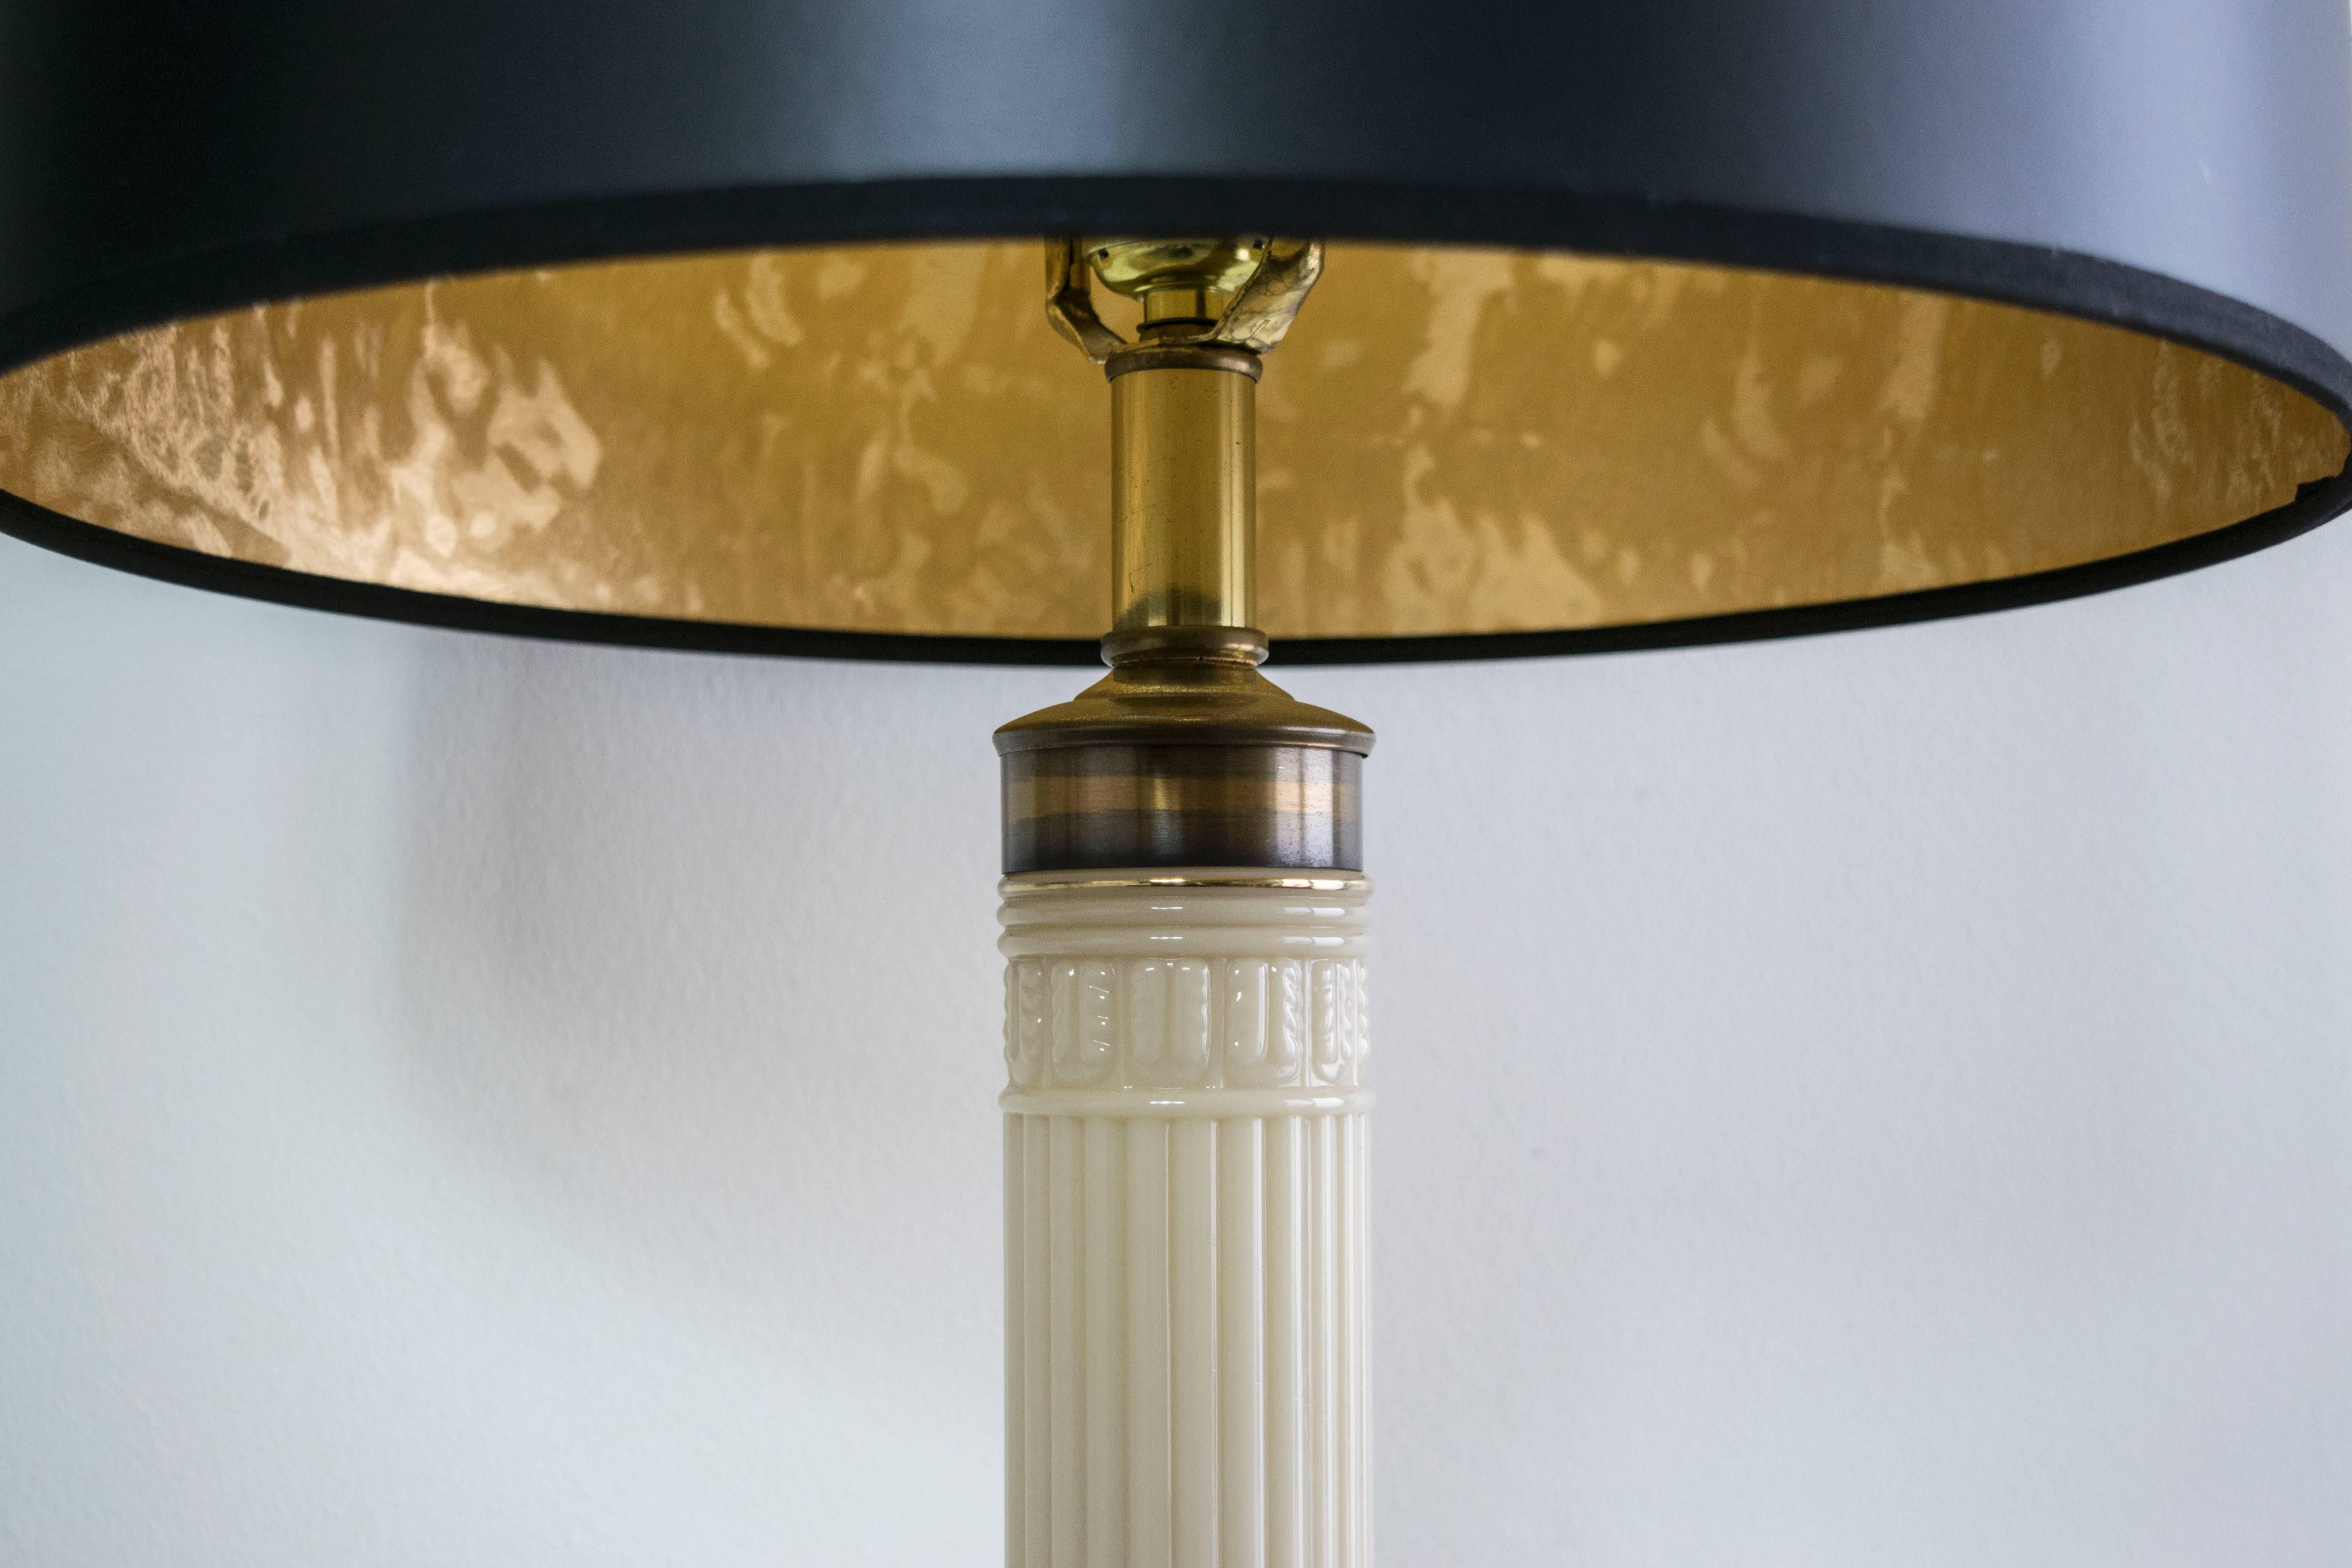 These lamps are elegantly constructed to provide dramatic highth with their Greek key brass bases and ceramic columns. They make a stately presence.